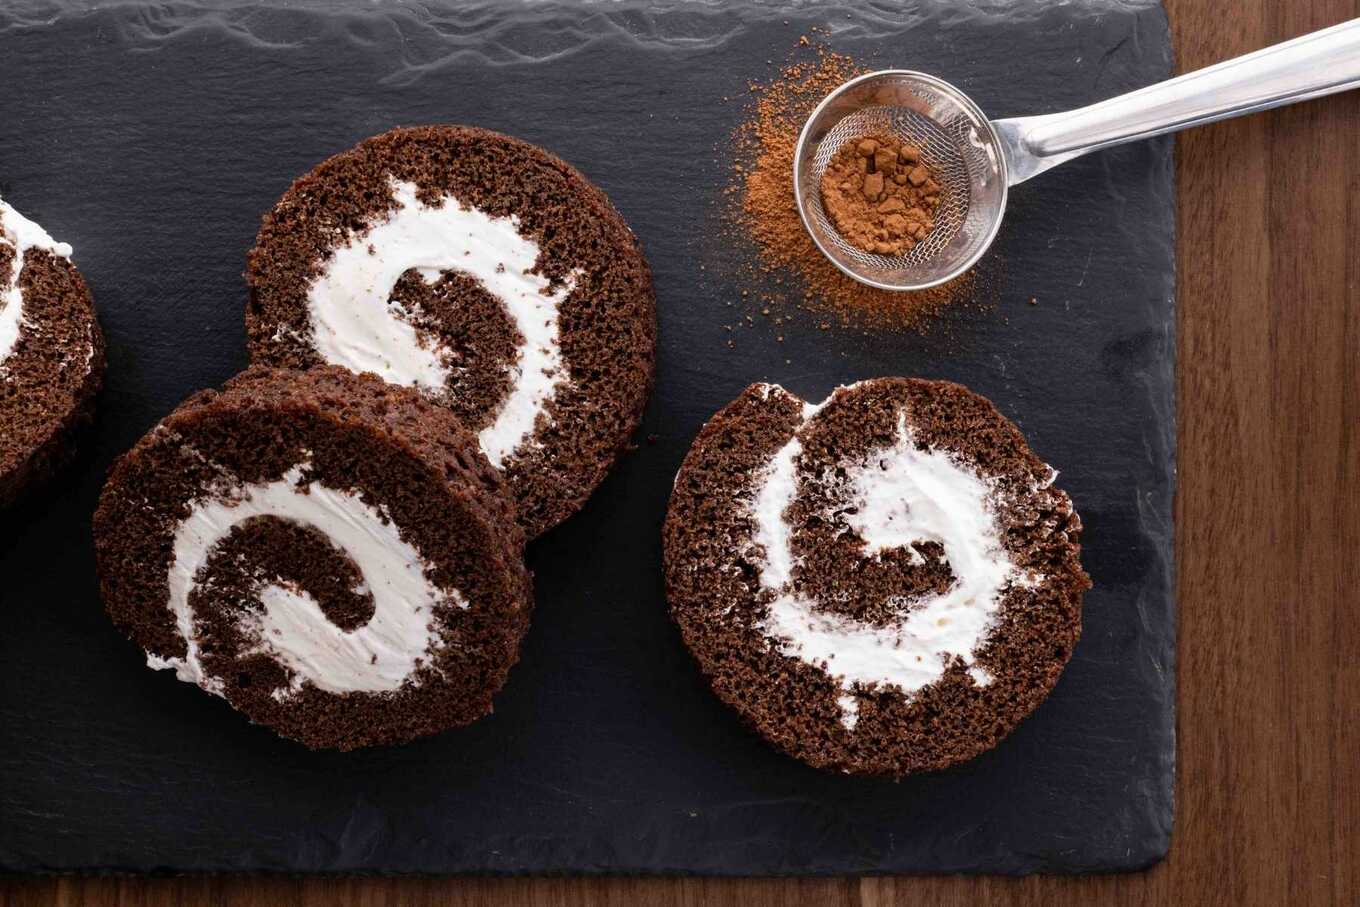 Chocolate Cake Roll (Swiss Roll) slices on serving plate